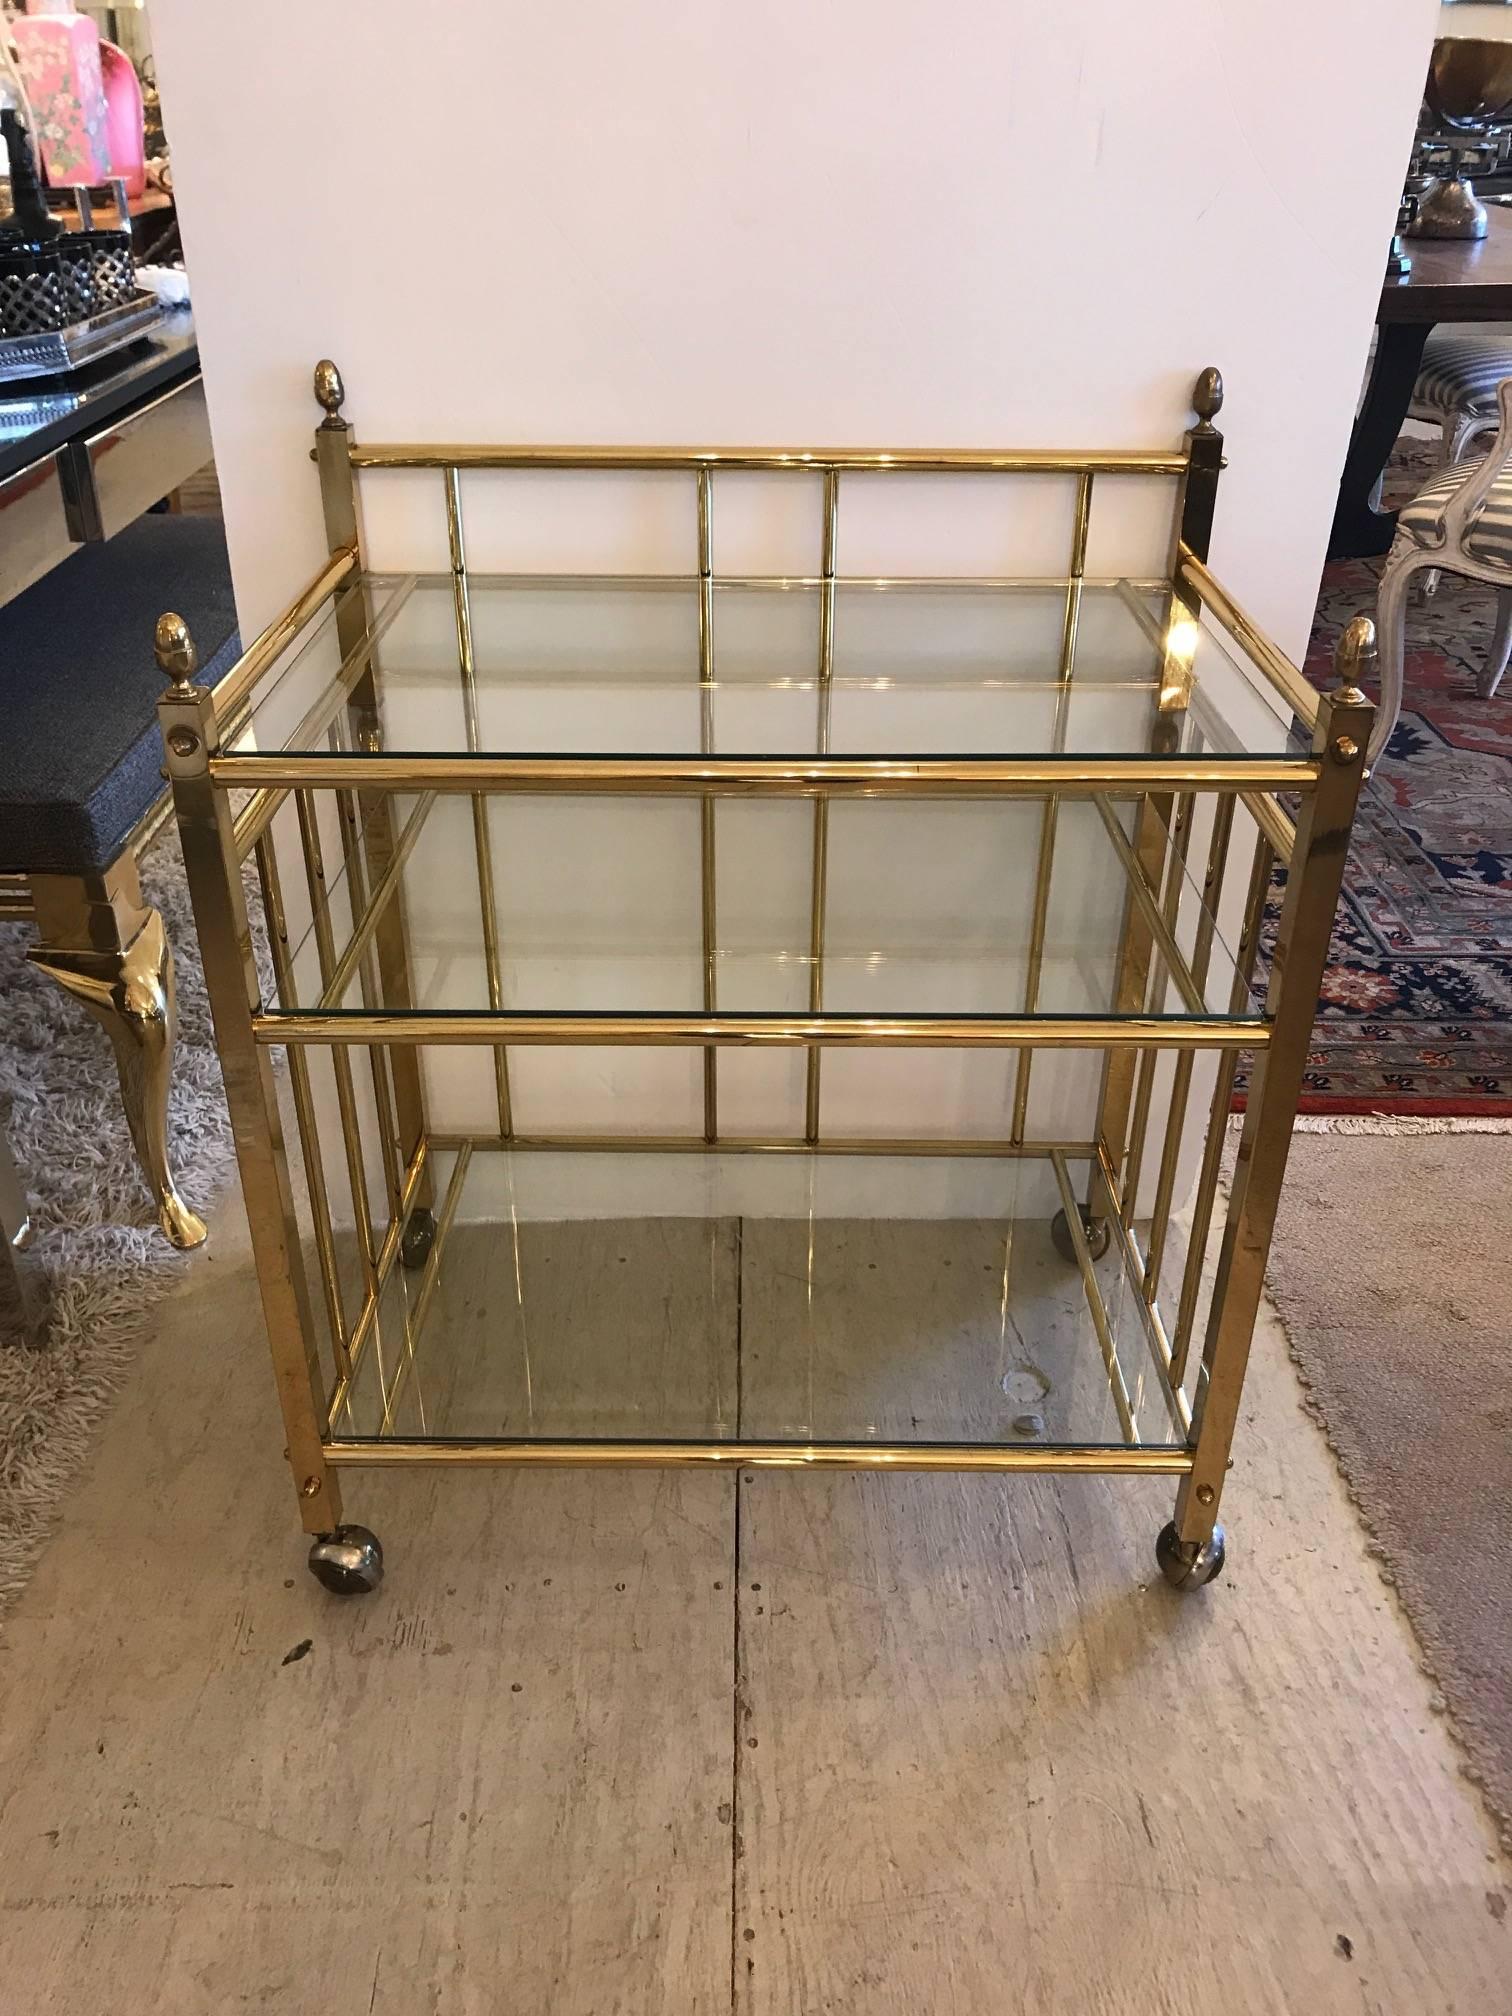 Stylish brass bar cart or server having three glass tiers and handsome acorn finials, on casters.
 